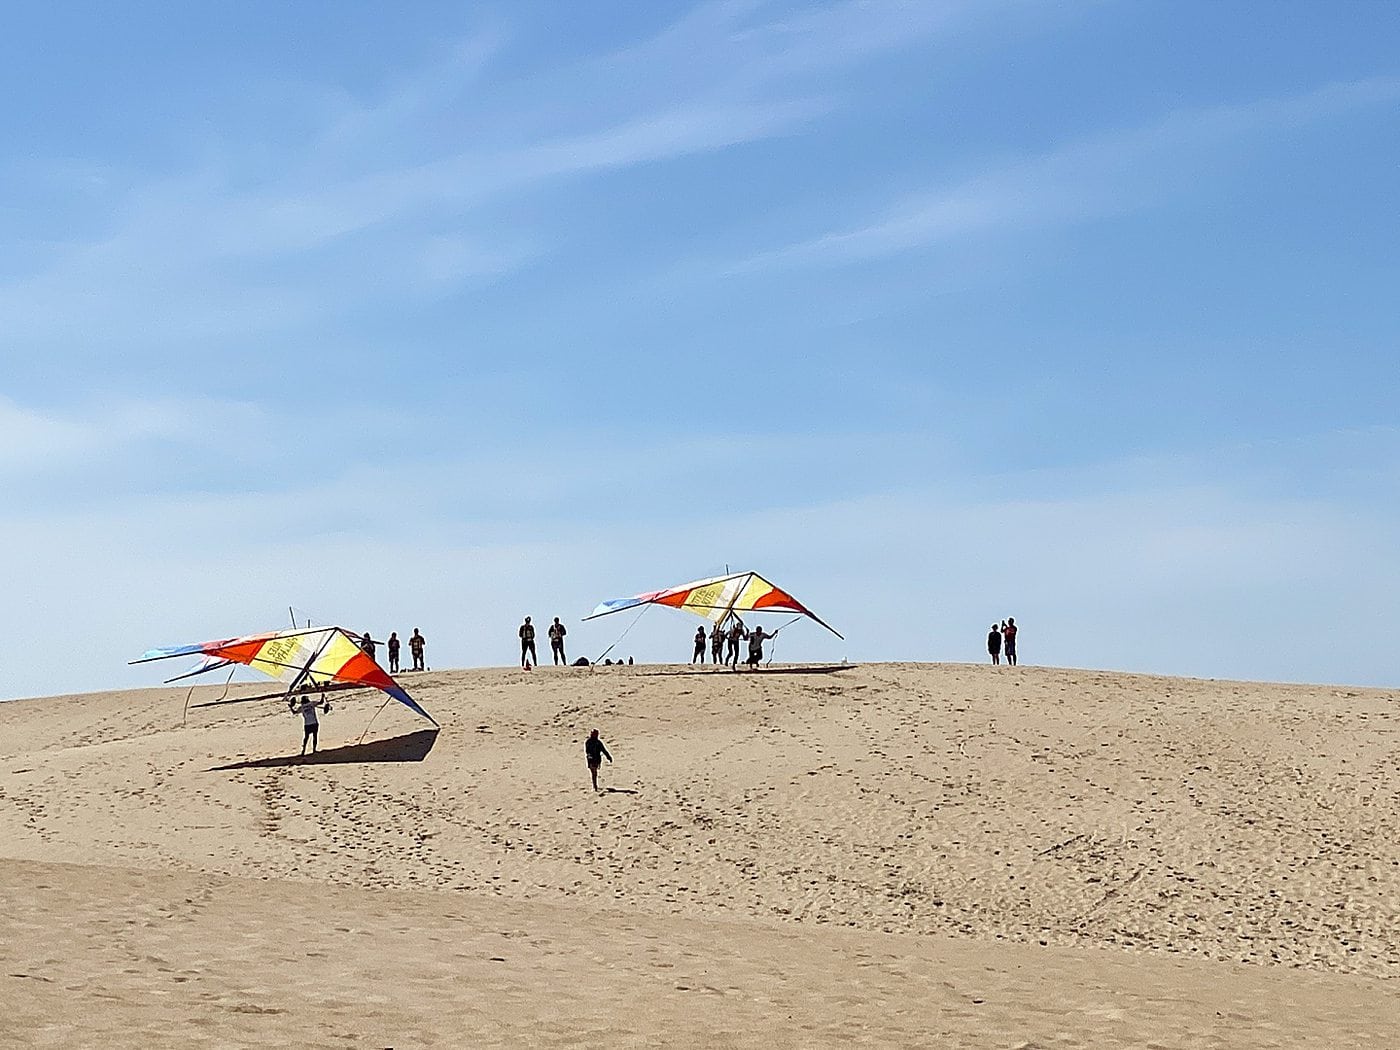 Hang gliding in the Outer Banks of NC with colorful red, yellow and blue hang gliders and tan colored sand dunes and blue sky at Jockey's Ridge State Park in Nags Head.